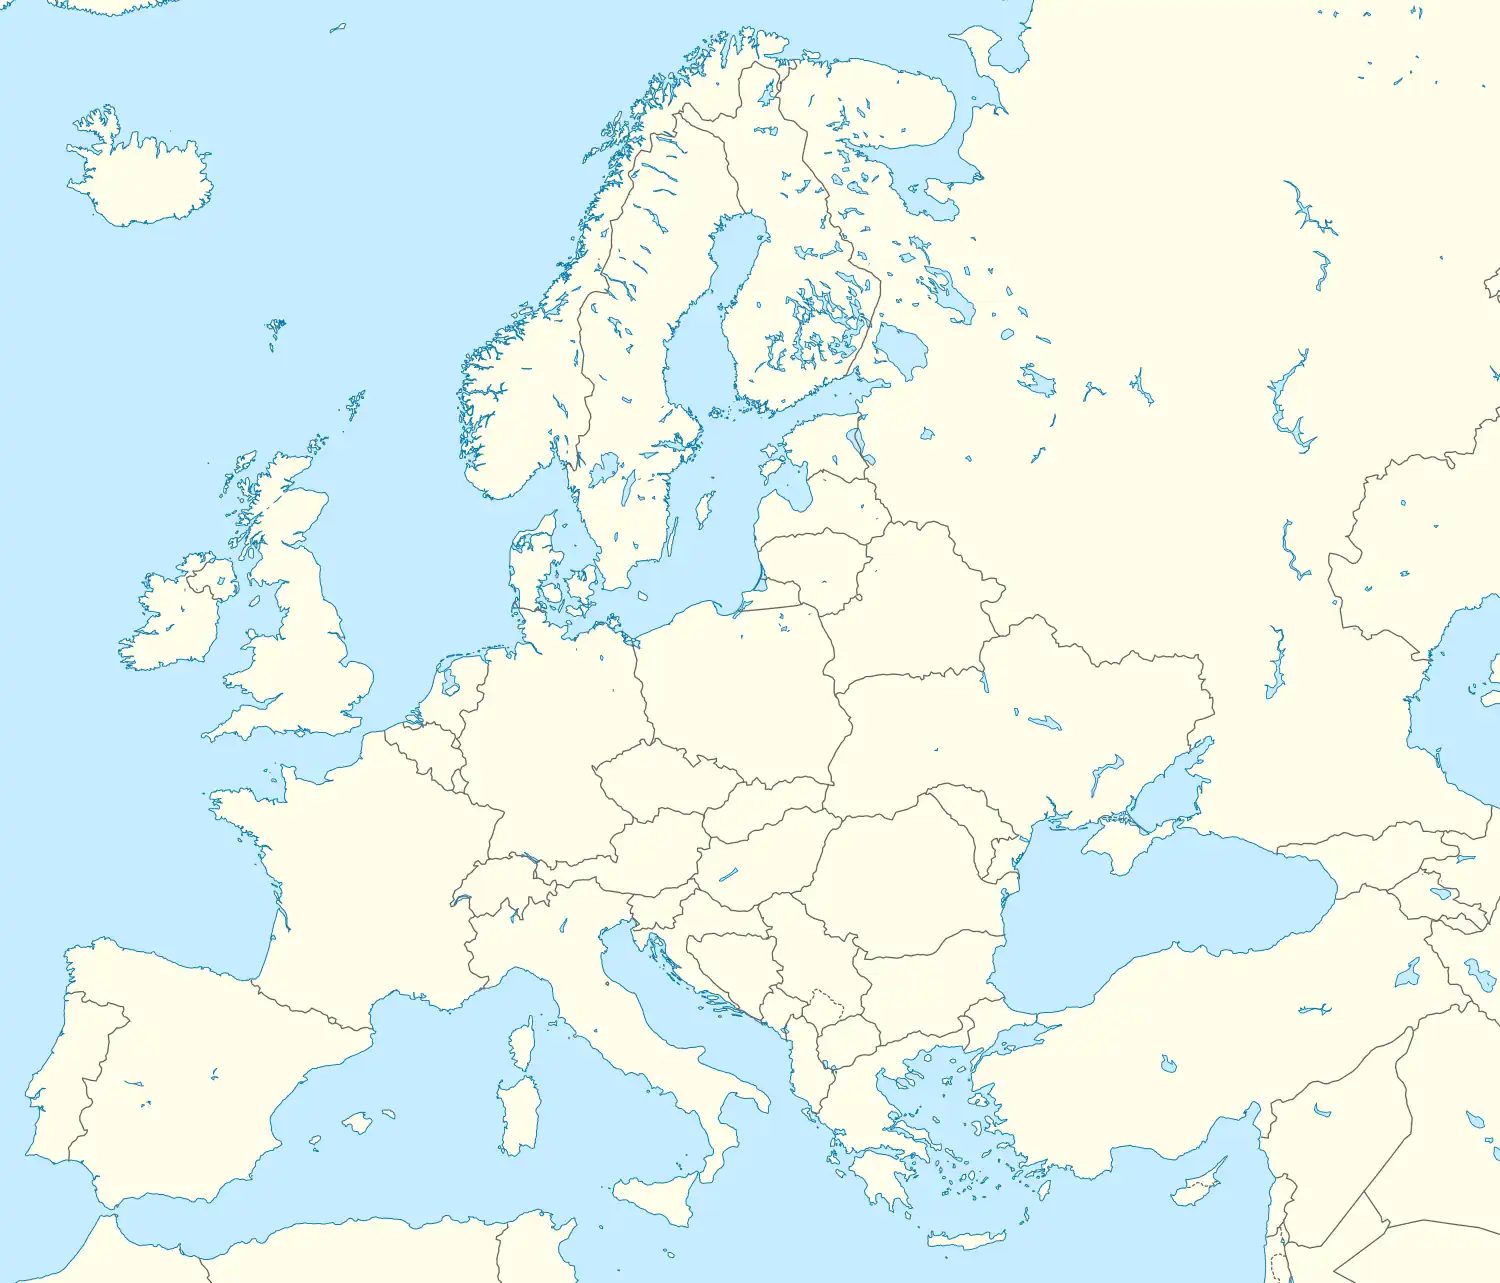 Barcelona is located in Europe